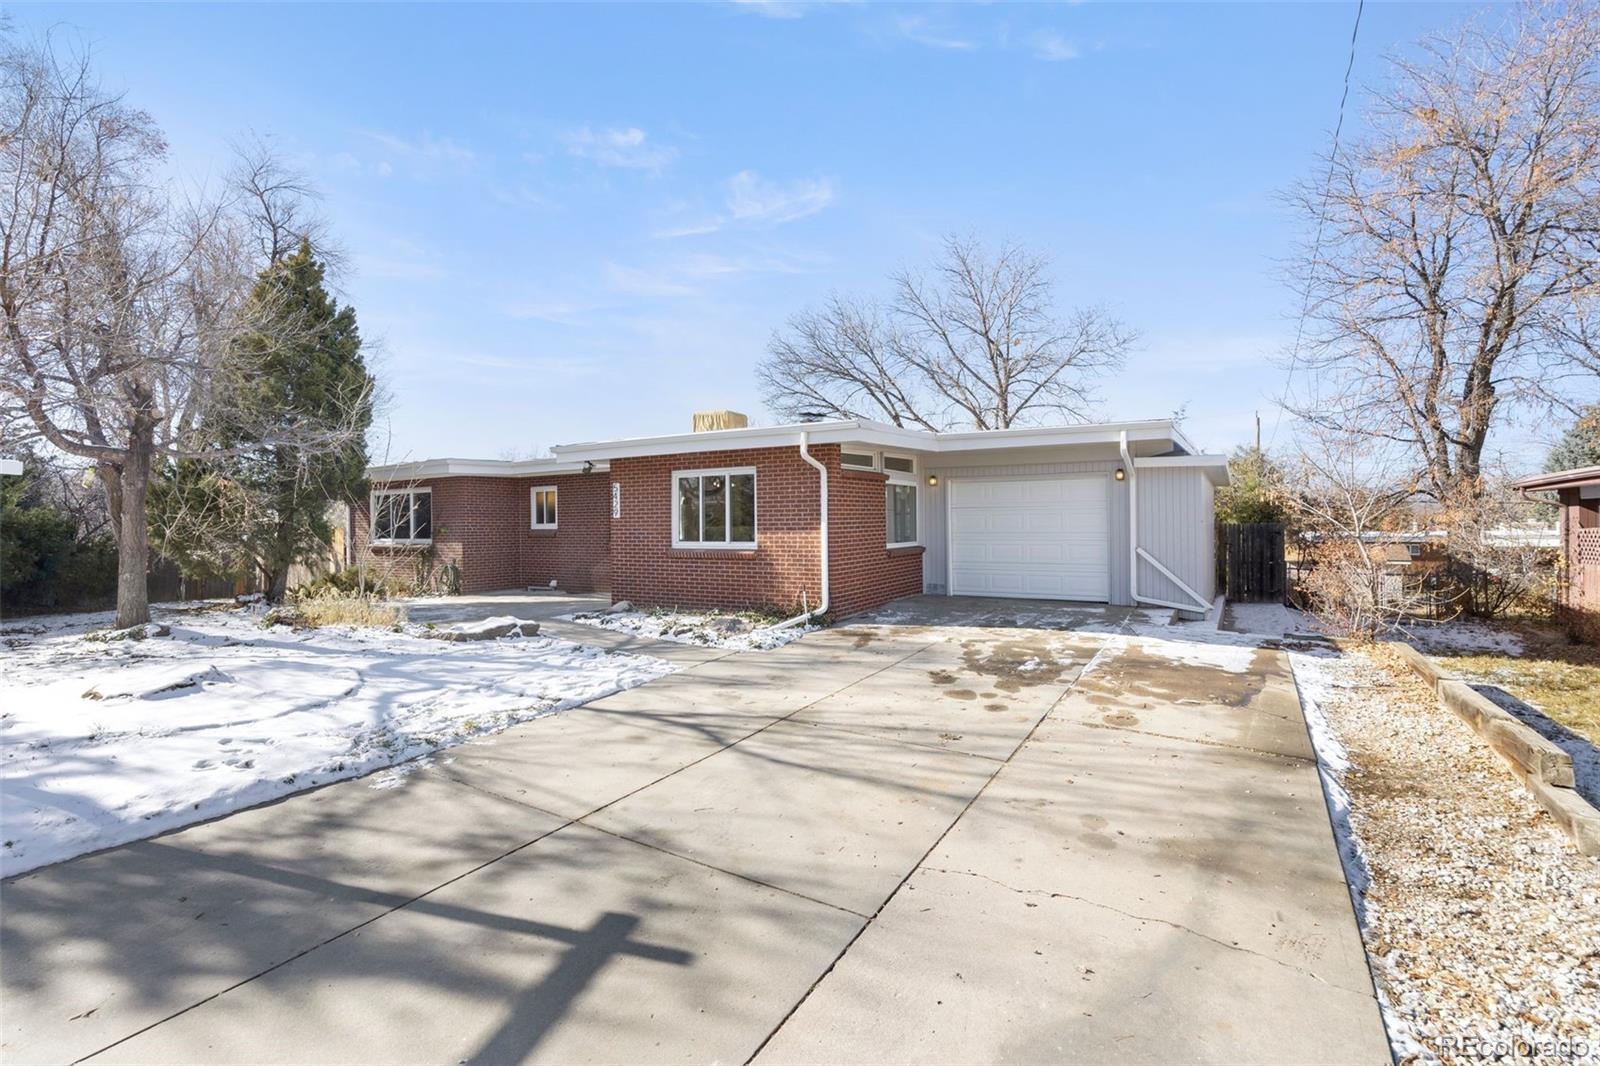 Report Image for 5429 S Huron Way,Littleton, Colorado